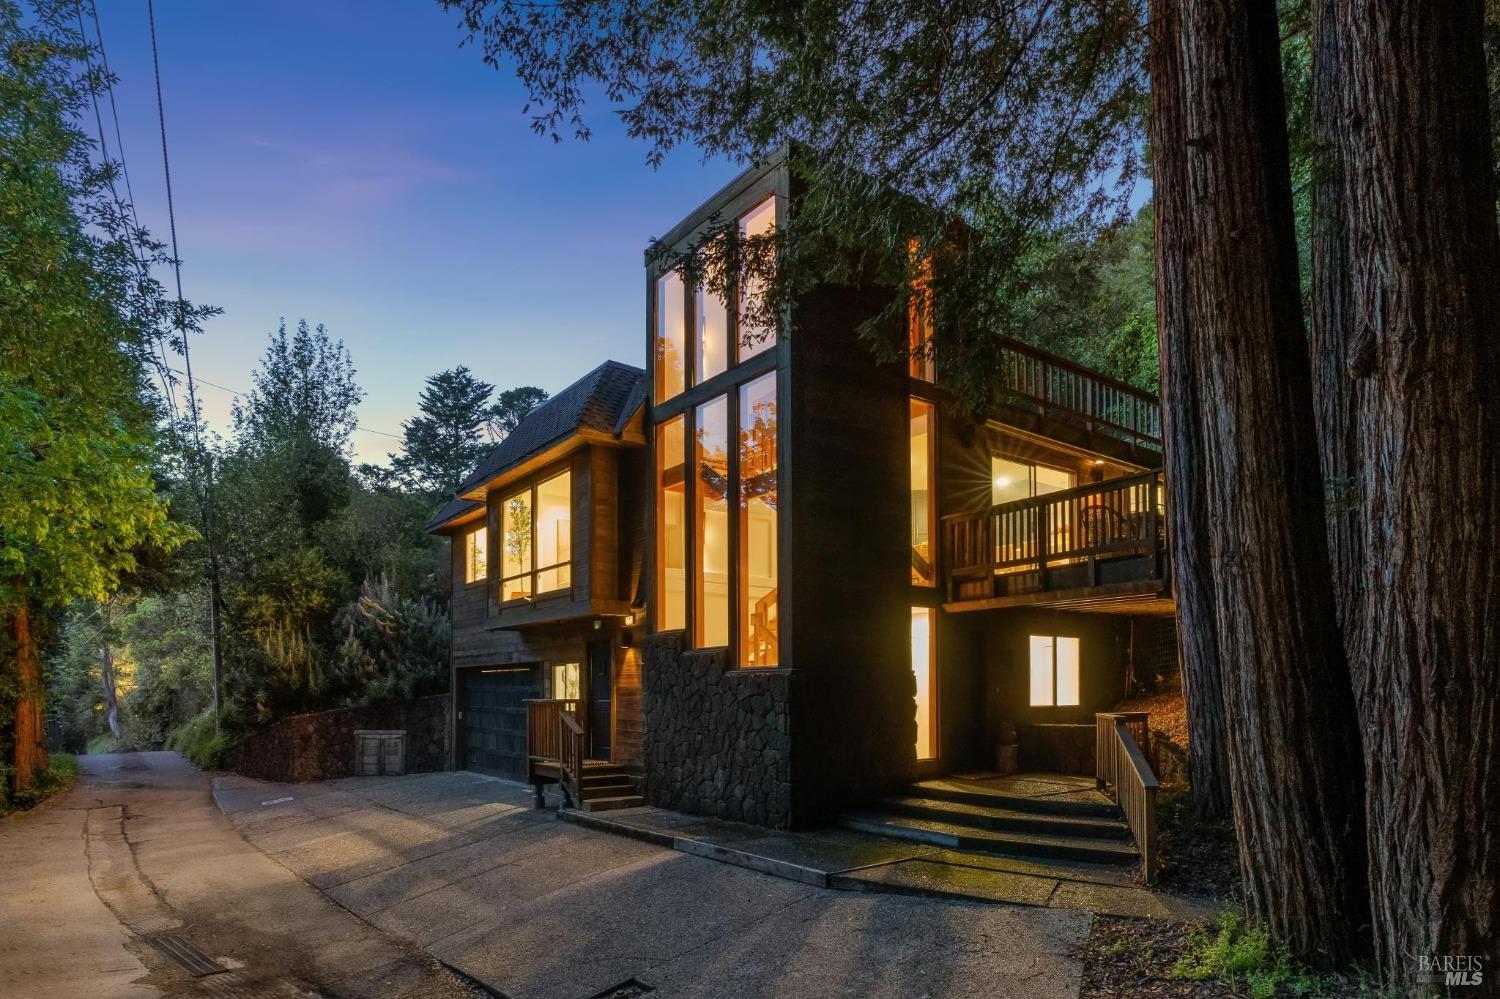 Photo of 101 Coronet Ave in Mill Valley, CA